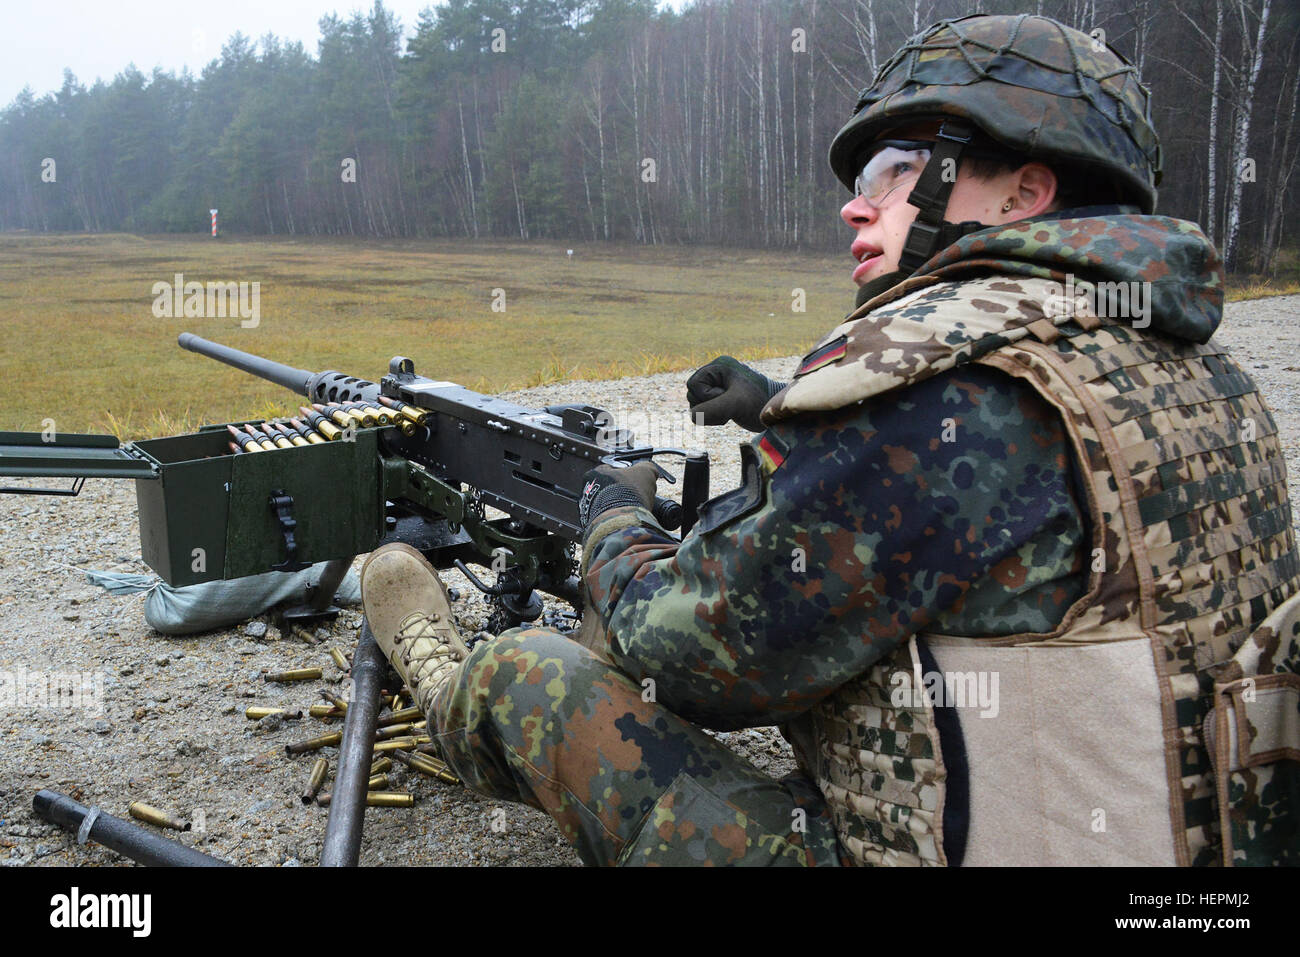 A German soldier fires a .50-caliber machine gun during a familiarization training on U.S. weapons at the 7th Army Joint Multinational Training Command Grafenwoehr Training Area, Germany, Dec. 9, 2015. (U.S. Army photo by Visual Information Specialist Gertrud Zach/released) CATC trains German soldiers on US weapons 151209-A-HE539-0478 Stock Photo